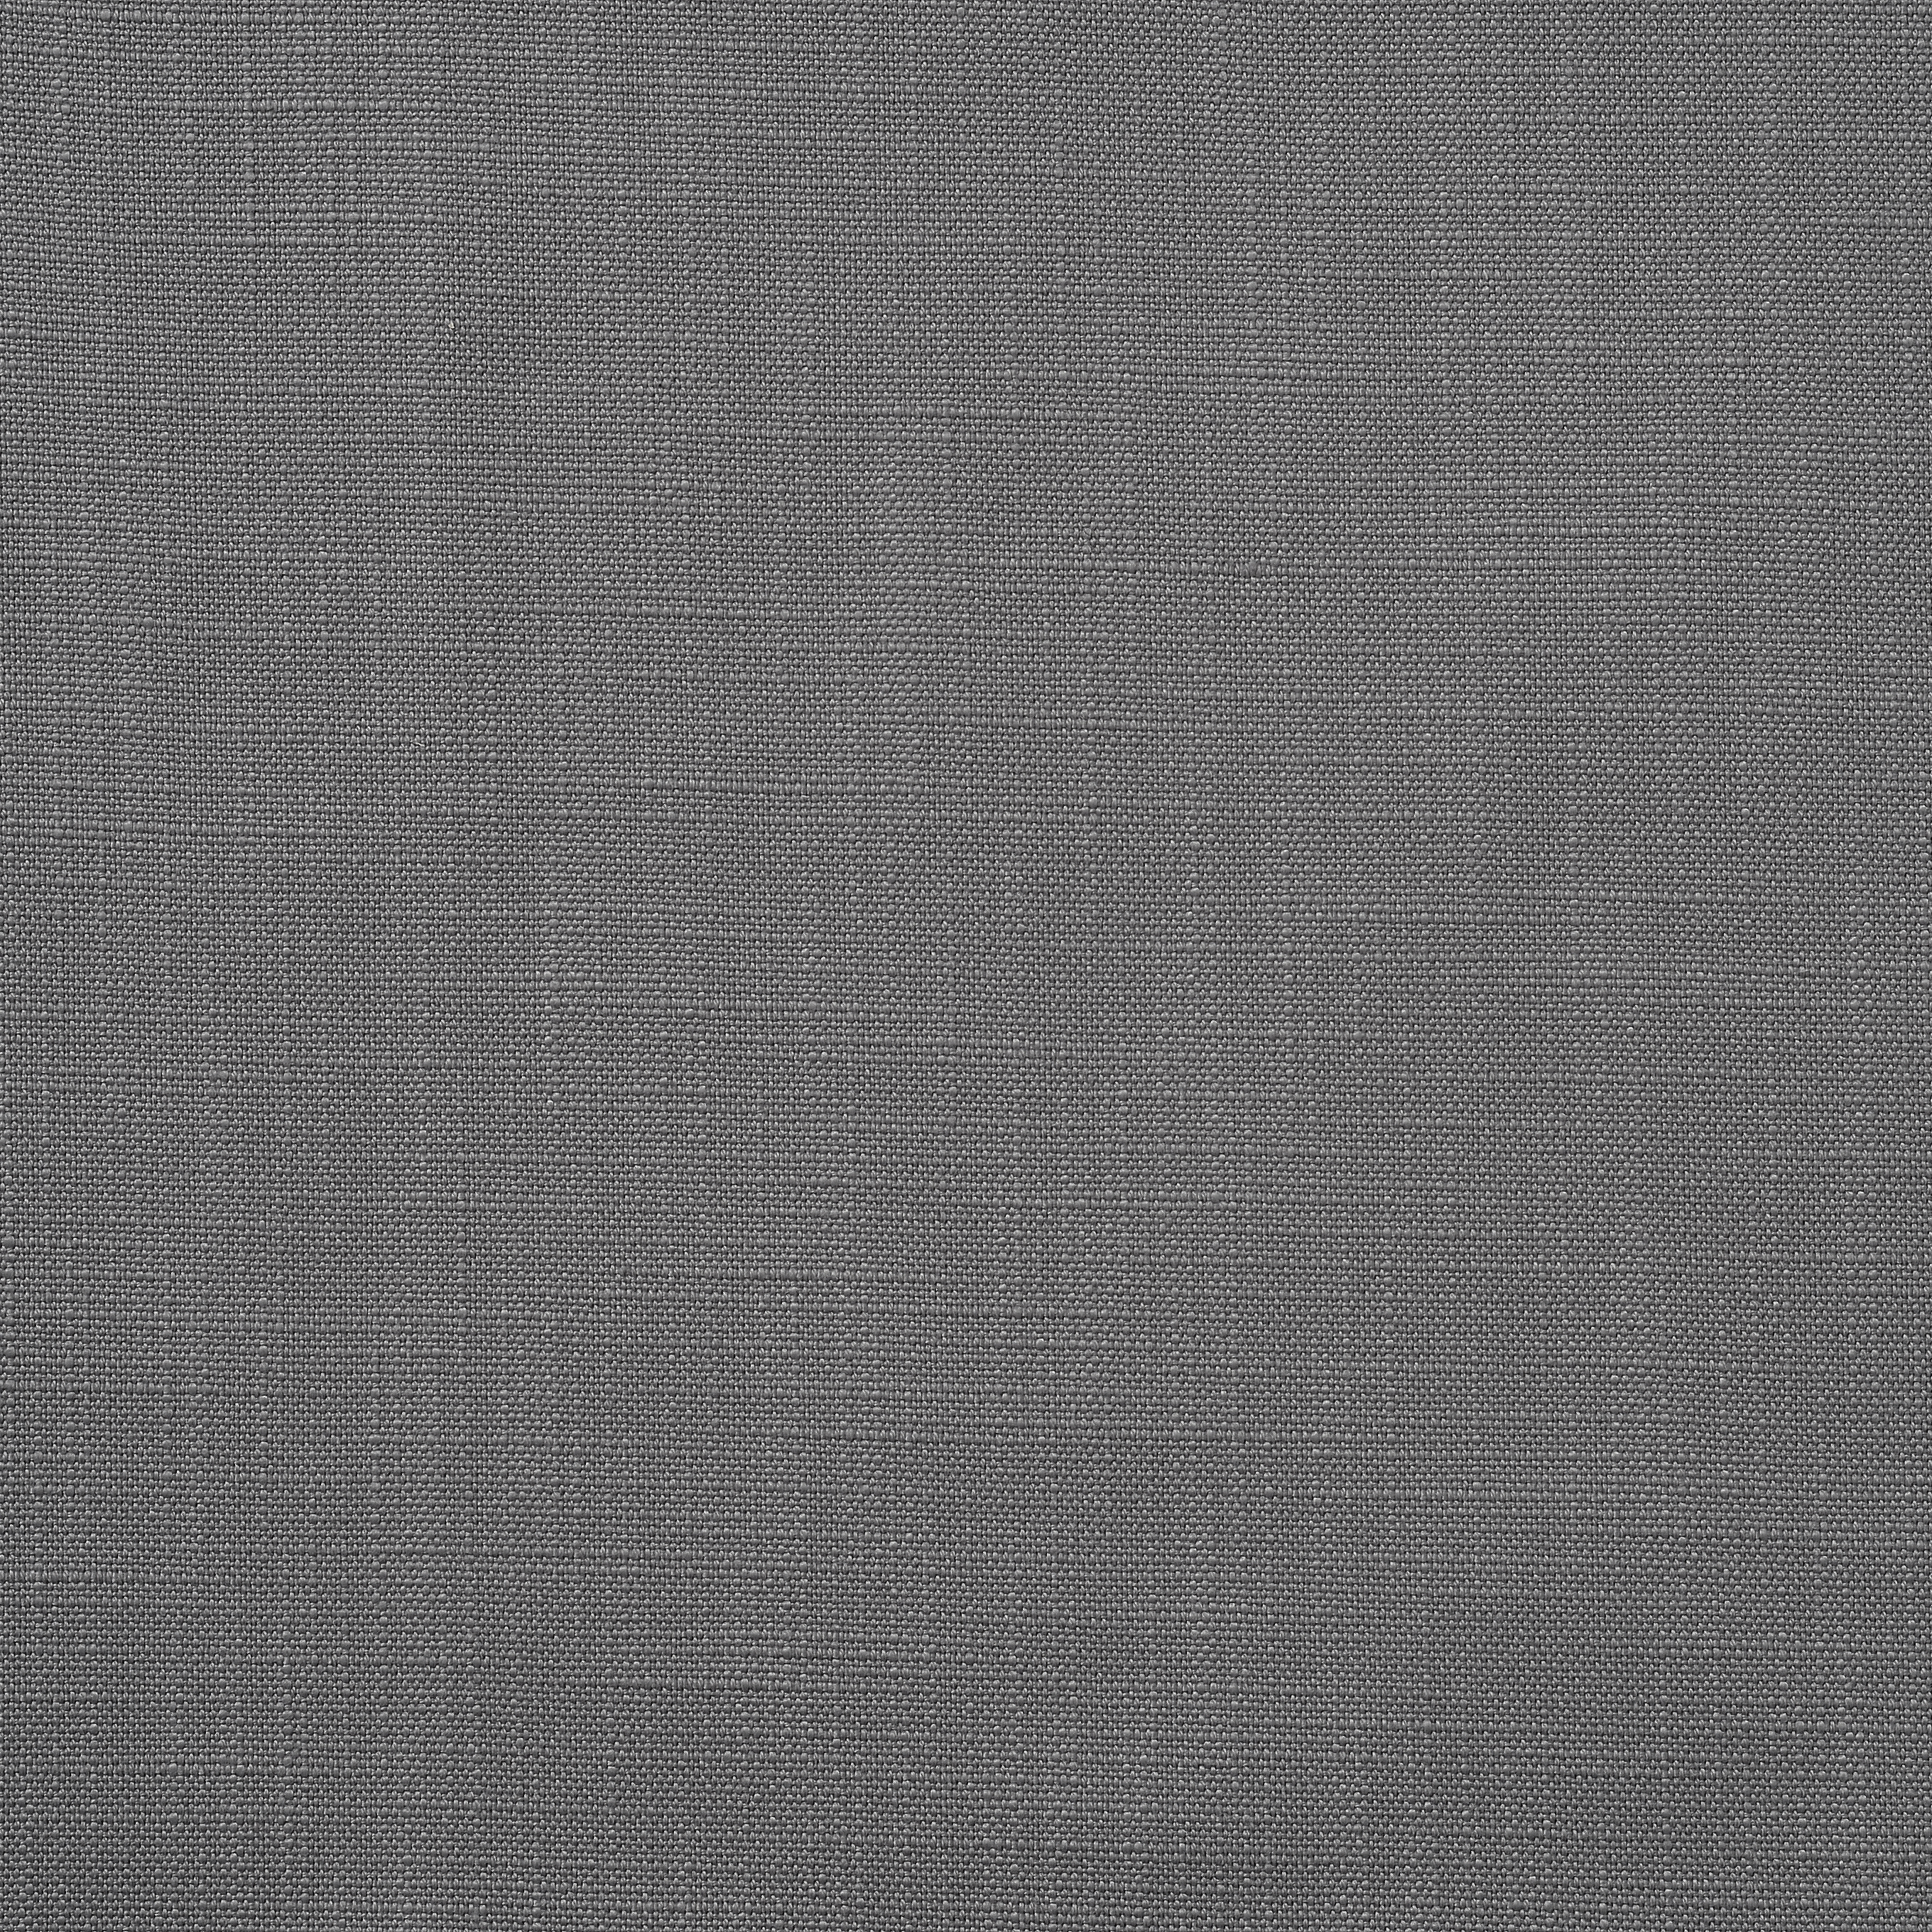 Mitford Cotswold Weave - Mid Grey